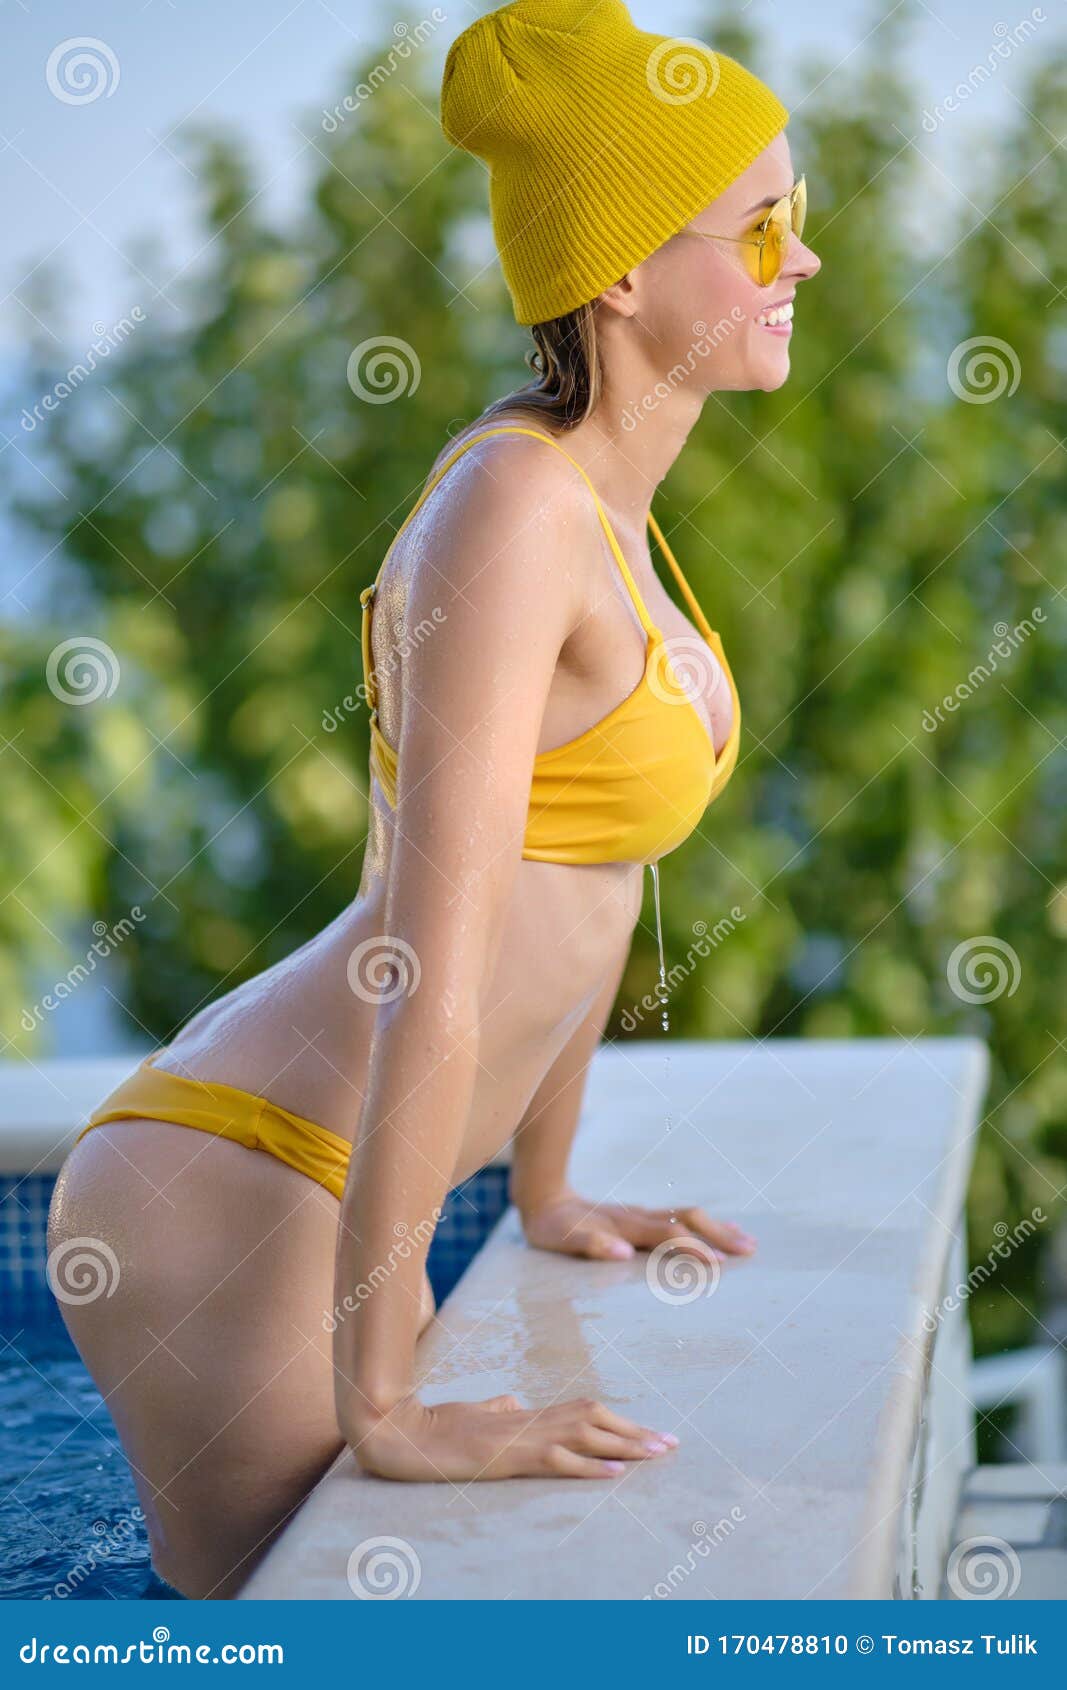 Elegant Woman in Luxury Bikini on the Sun-tanned Slim and Shapely Body is  Posing Near the Swimming Pool. Sunbathing by Stock Image - Image of body,  natural: 152237901